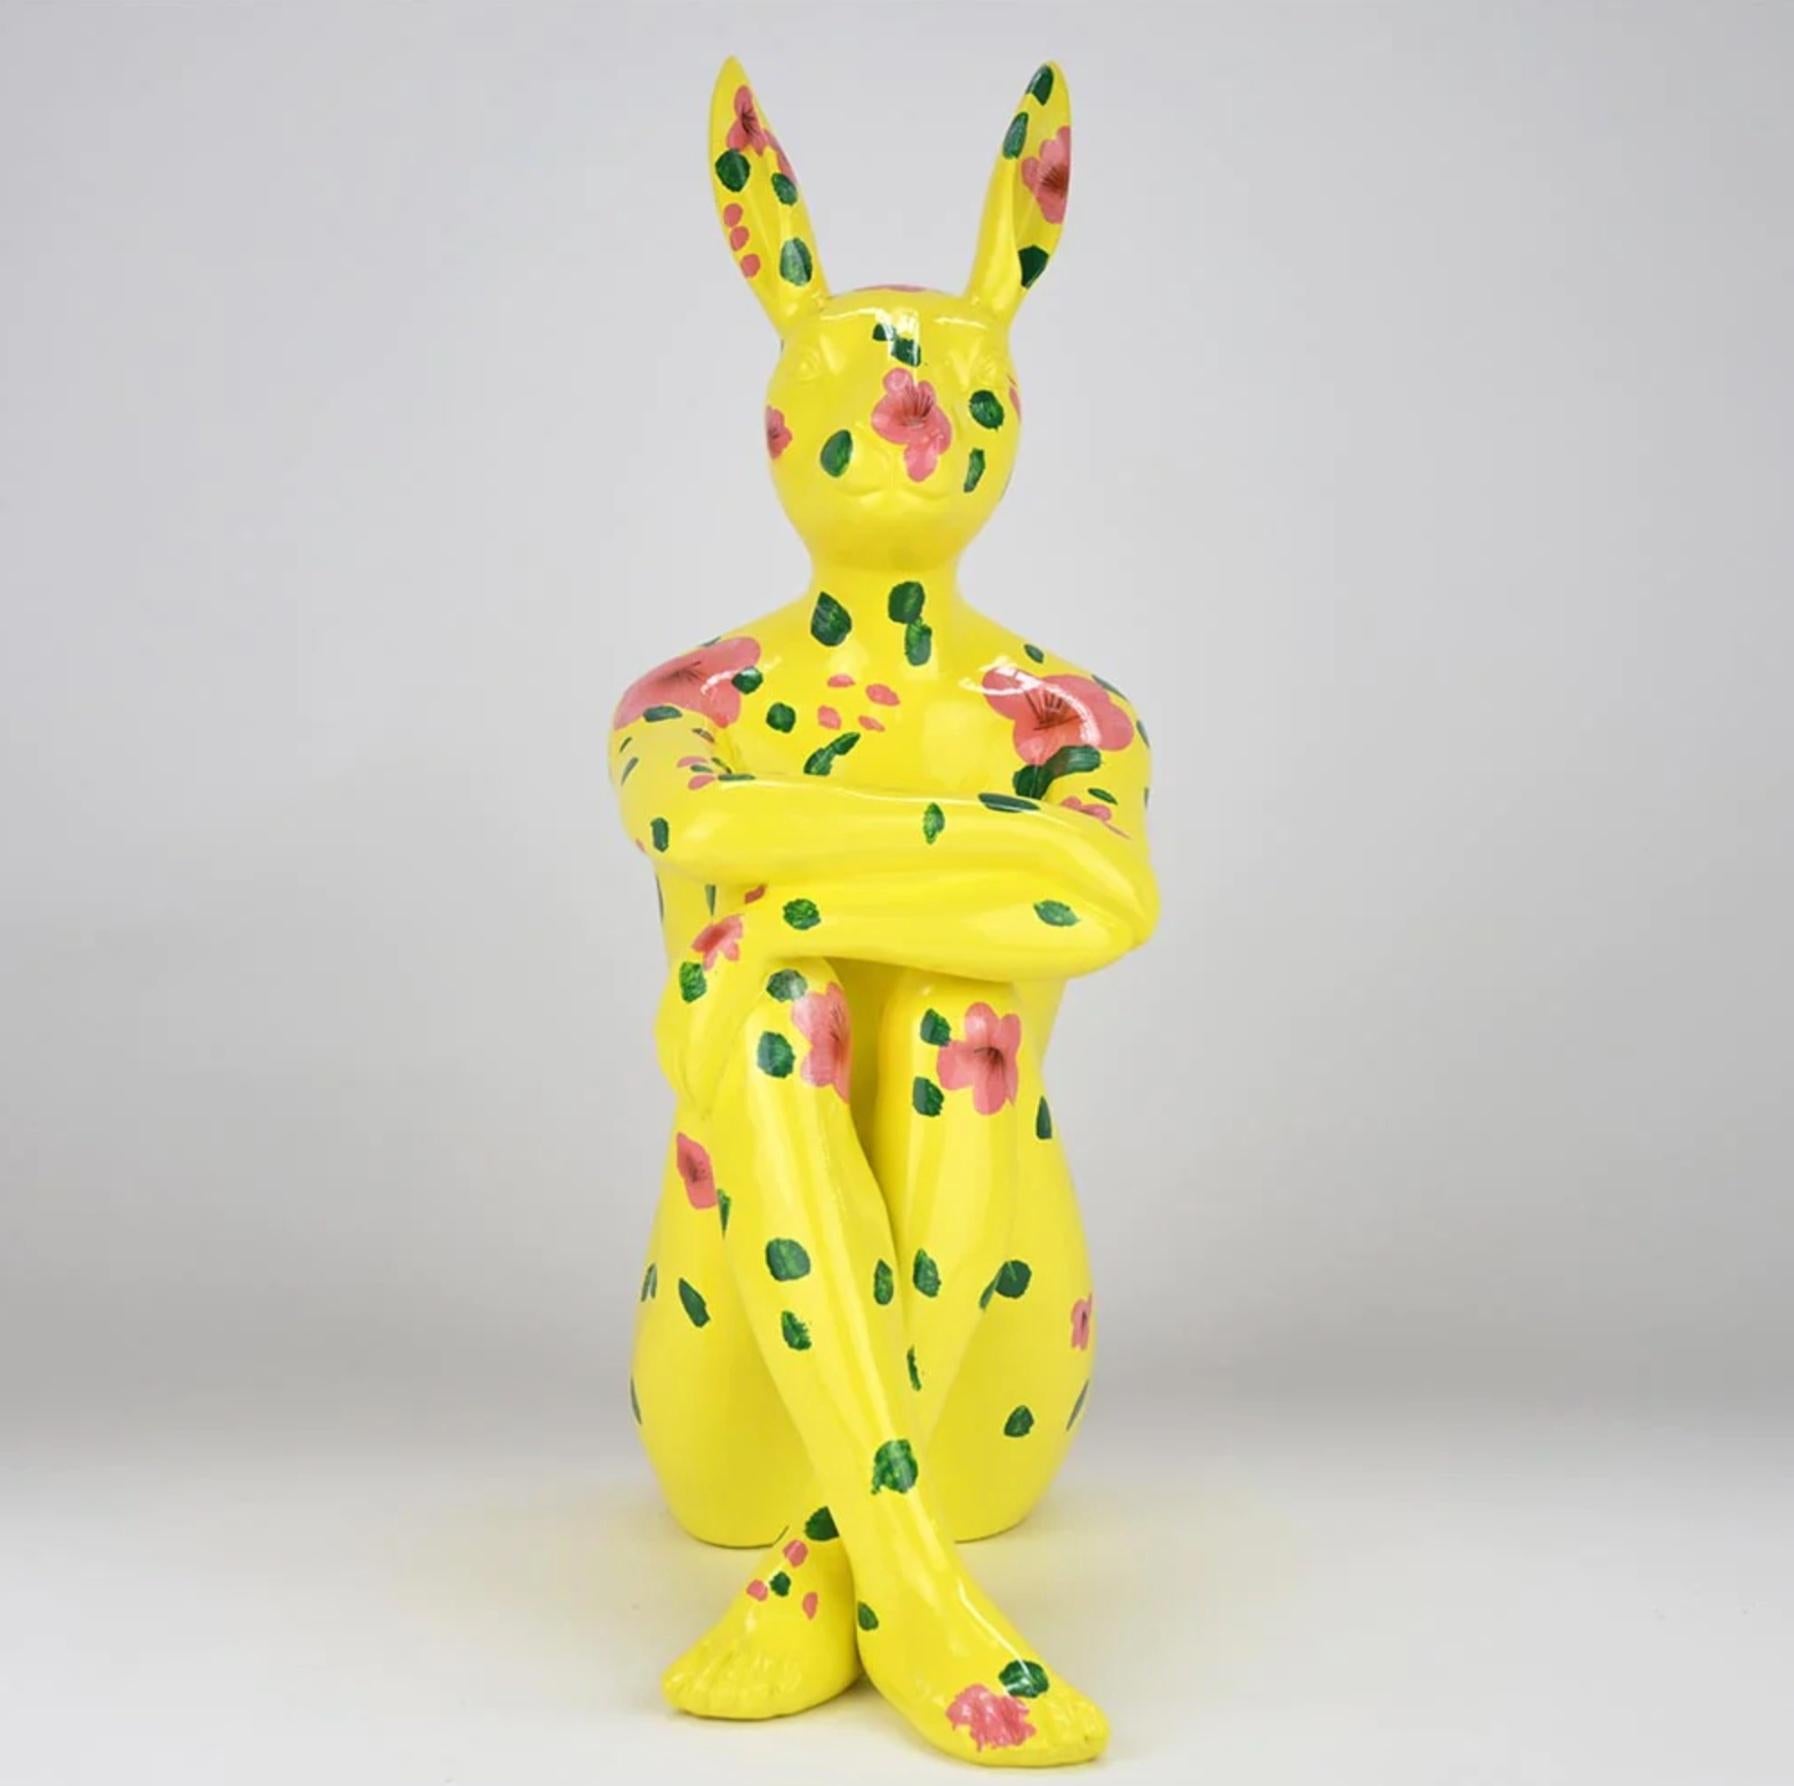 Authentic Resin Splash Pop City Bunny Sculpture by Gillie and Marc  - Contemporary Art by Gillie and Marc Schattner